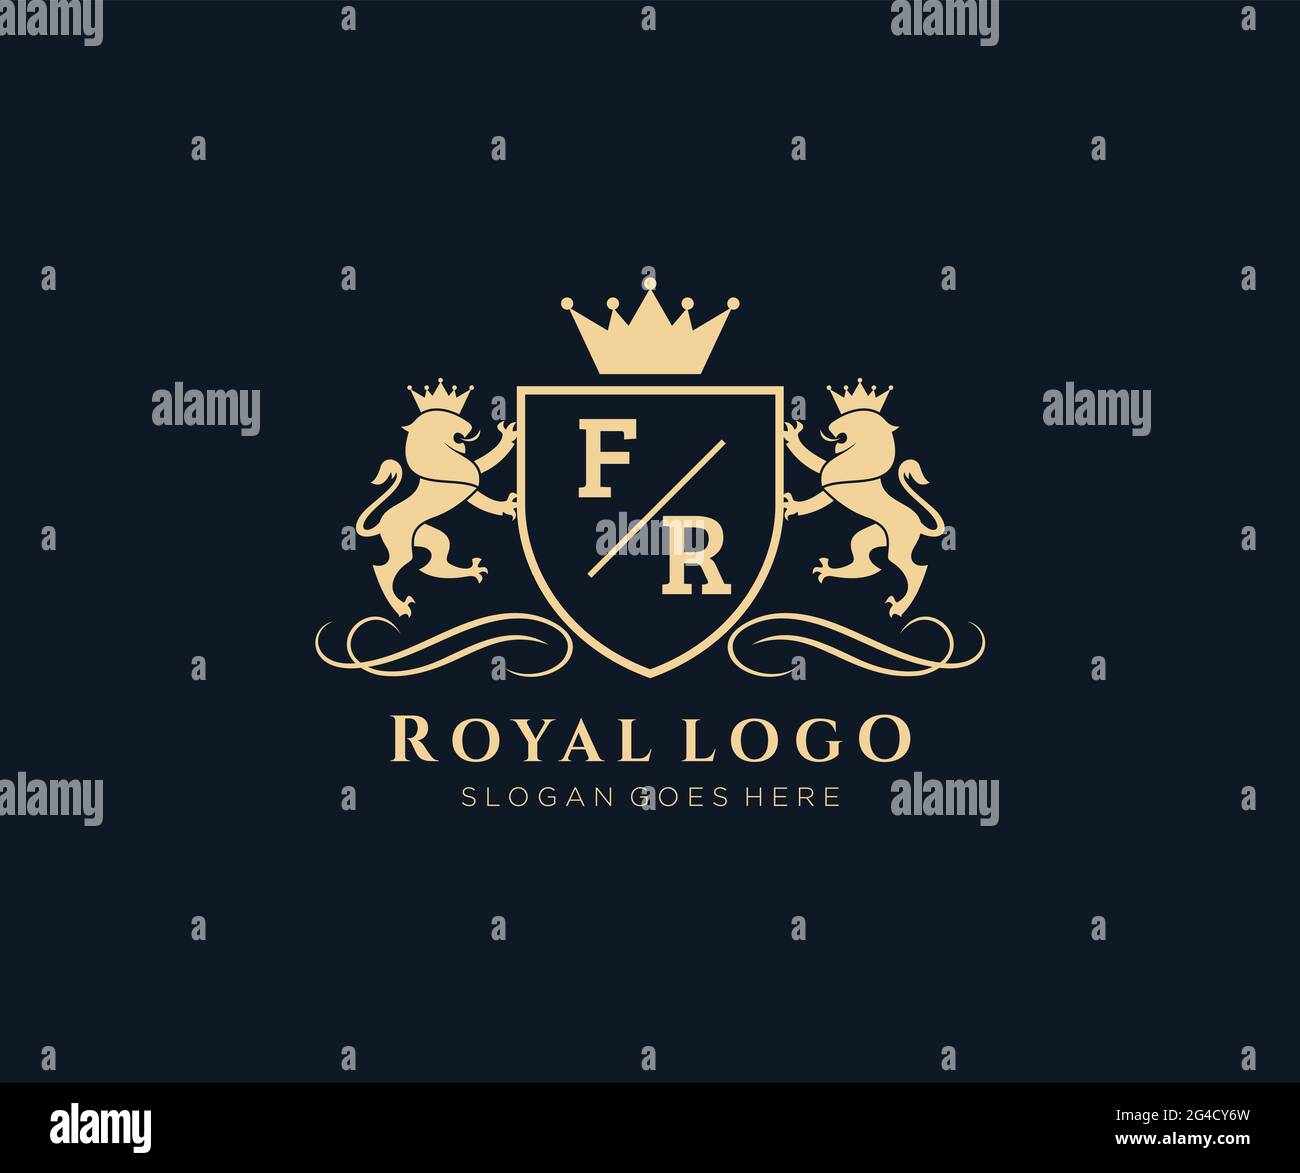 FR Letter Lion Royal Luxury Heraldic,Crest Logo template in vector art for Restaurant, Royalty, Boutique, Cafe, Hotel, Heraldic, Jewelry, Fashion and Stock Vector